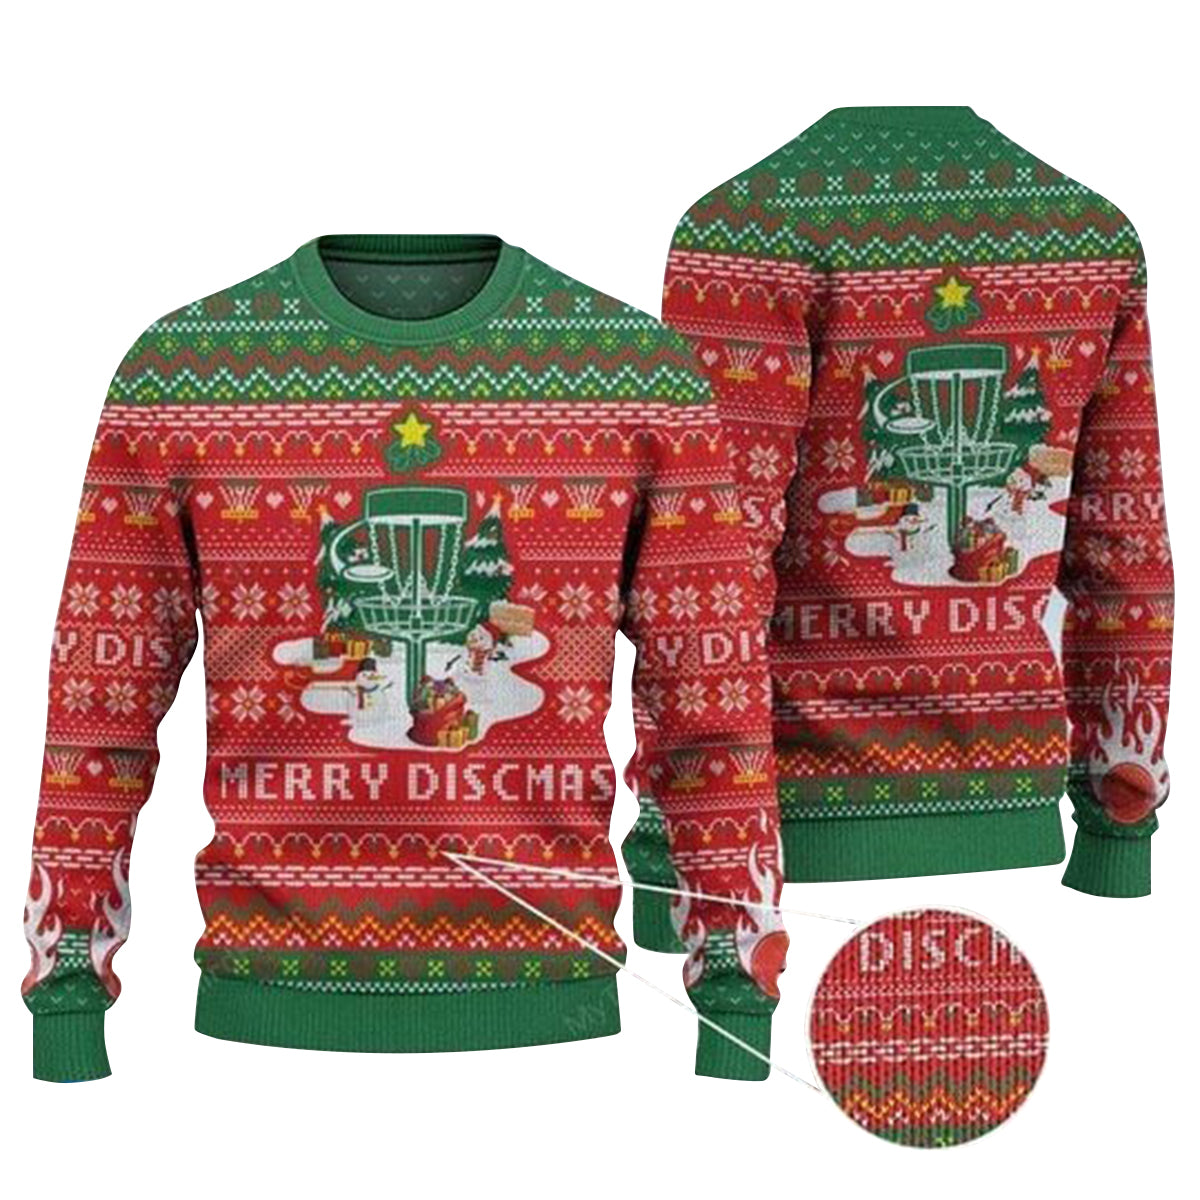 Disc Golf Merry Xmas Ugly Christmas Sweater, Funny Christmas Pattern Ugly Sweater For Men & Women - Best Gift For Christmas, Disc Golf Lovers